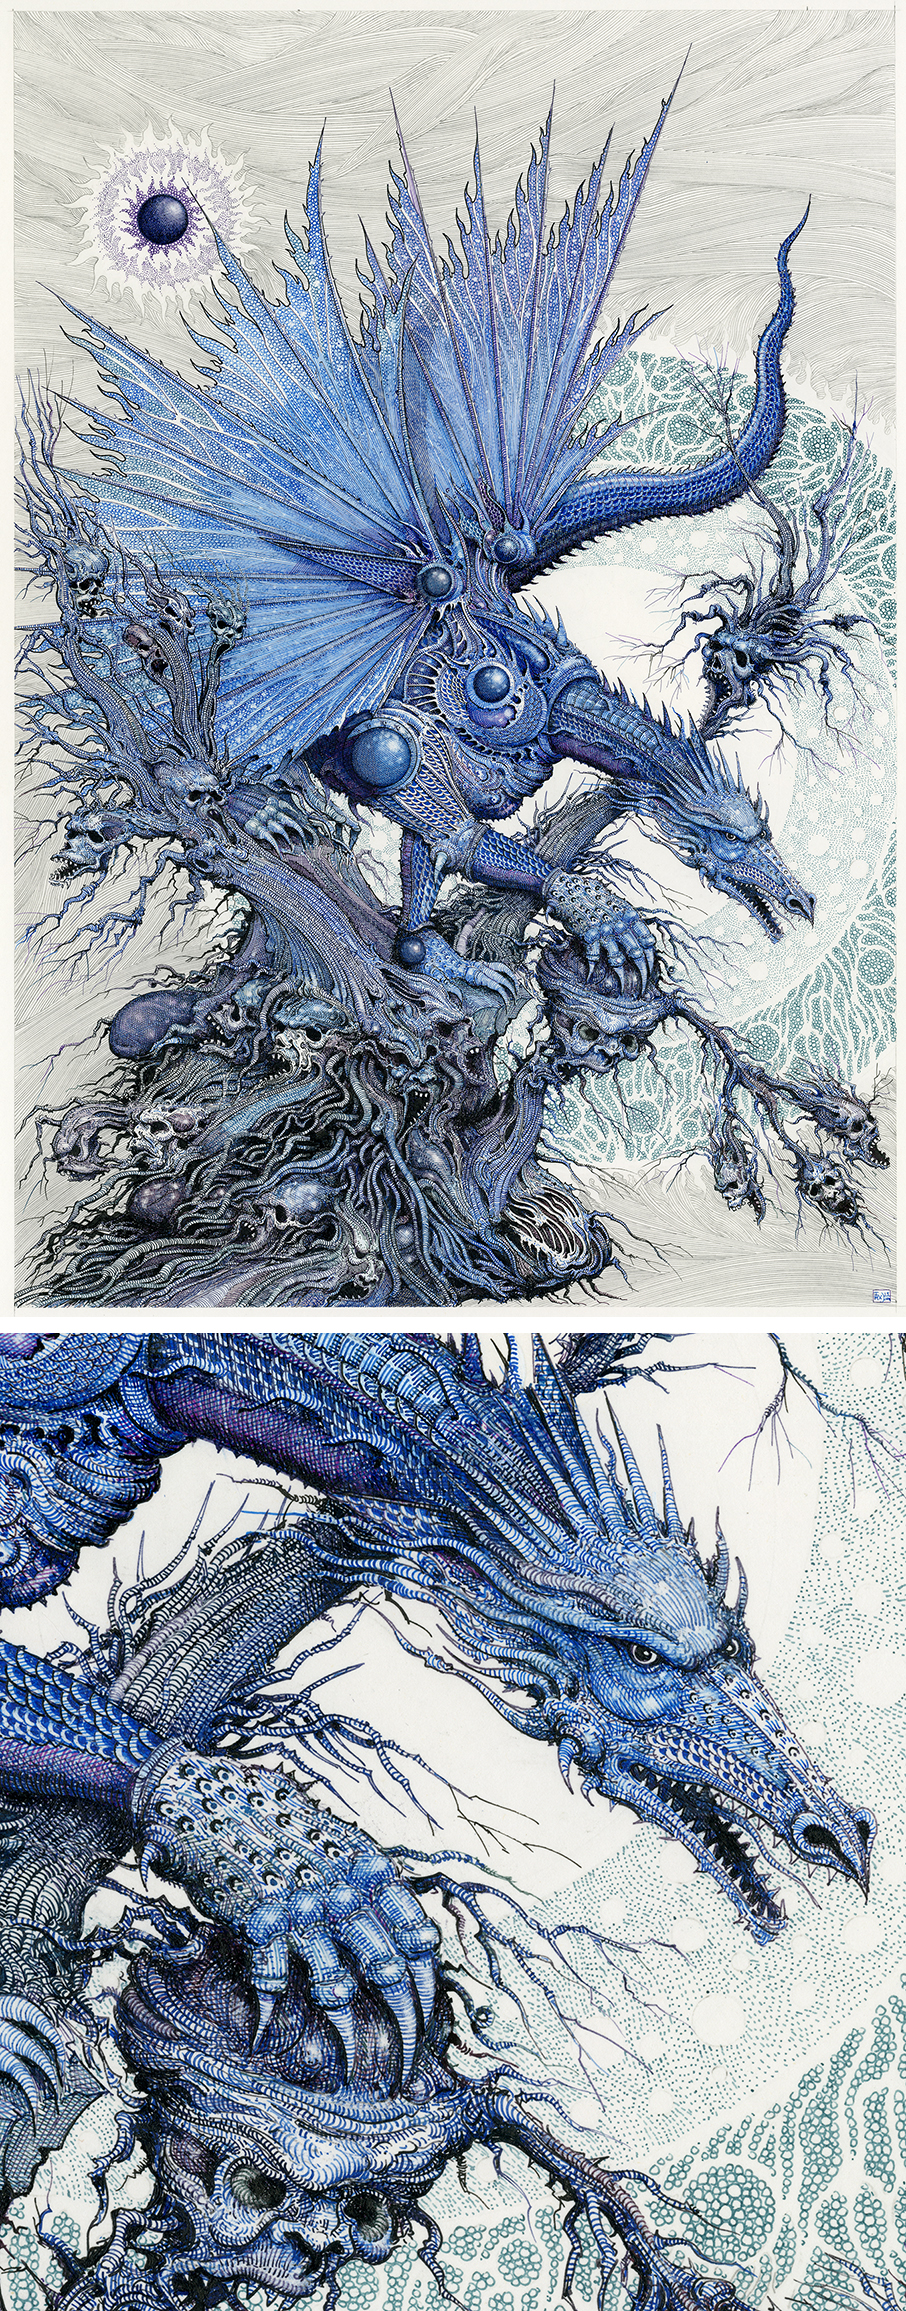 Ian Miller | Saturion, the Warrior who wears the armour taken from other dragons